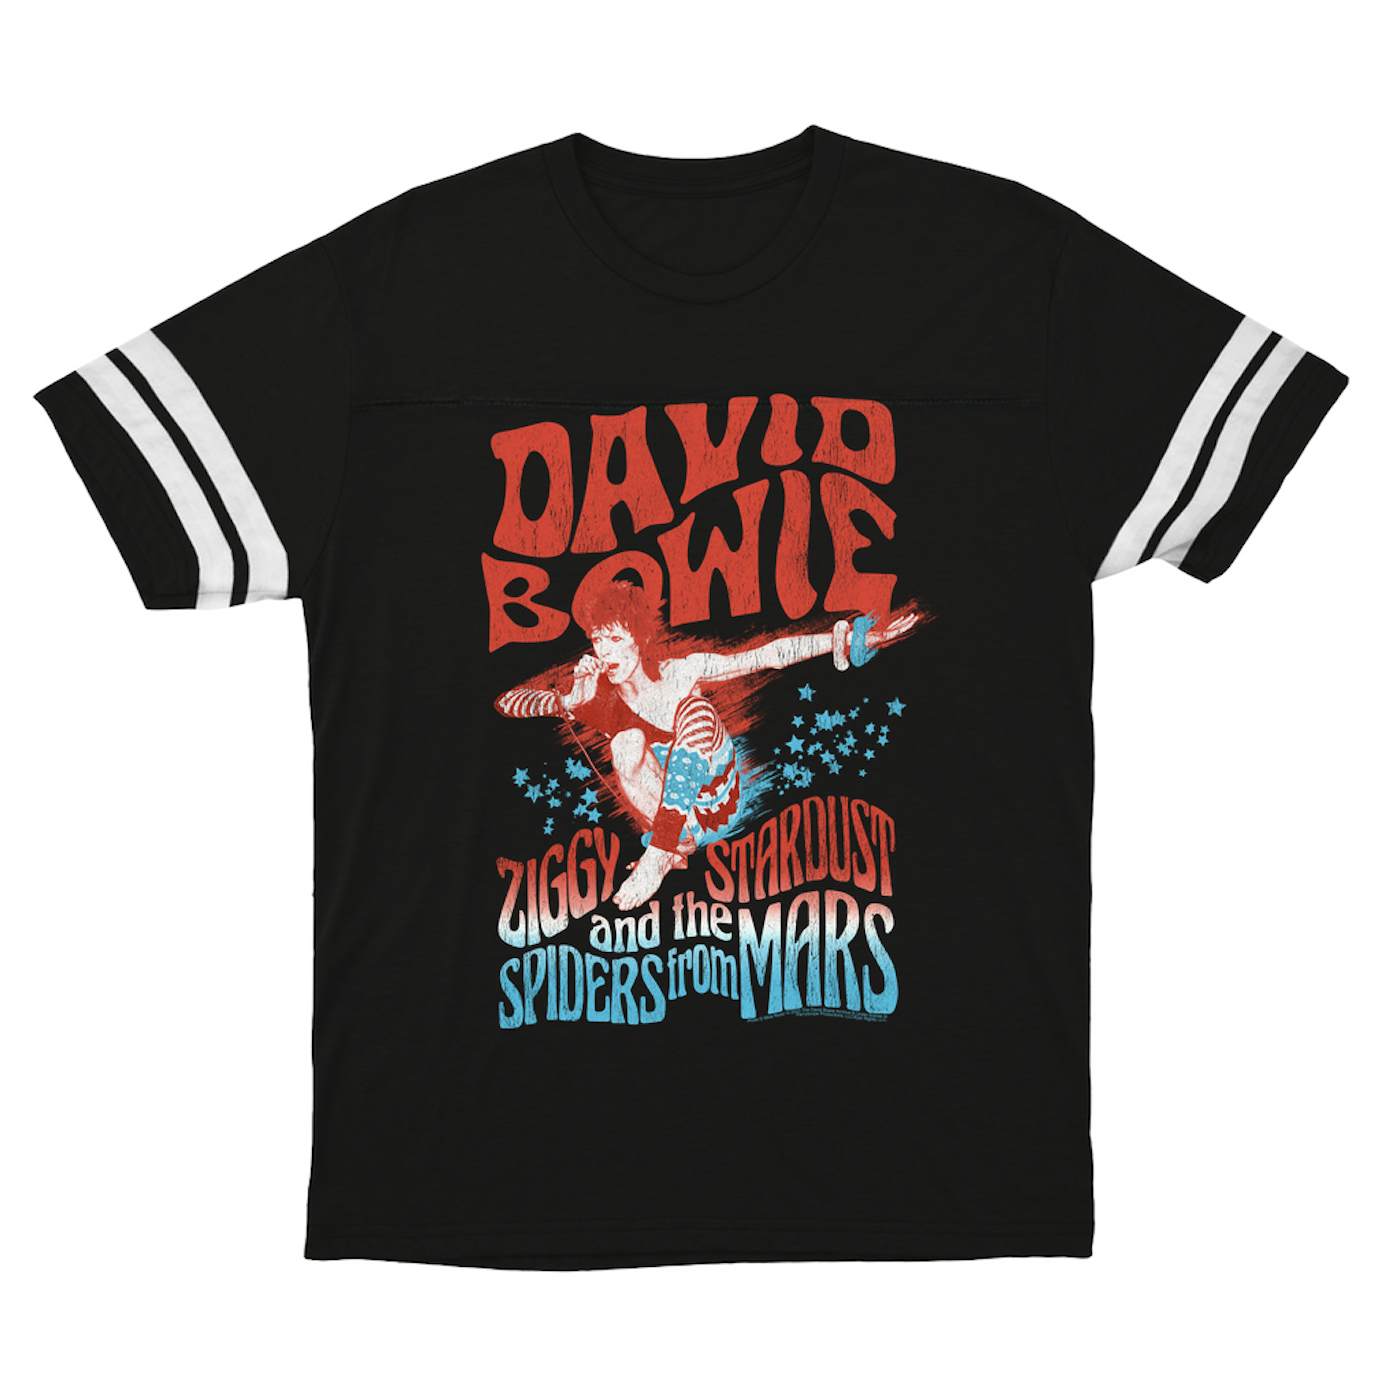 David Bowie T-Shirt | Red, White, Blue Ziggy Stardust And The Spiders From Mars (Merchbar Exclusive) David Bowie Football Shirt